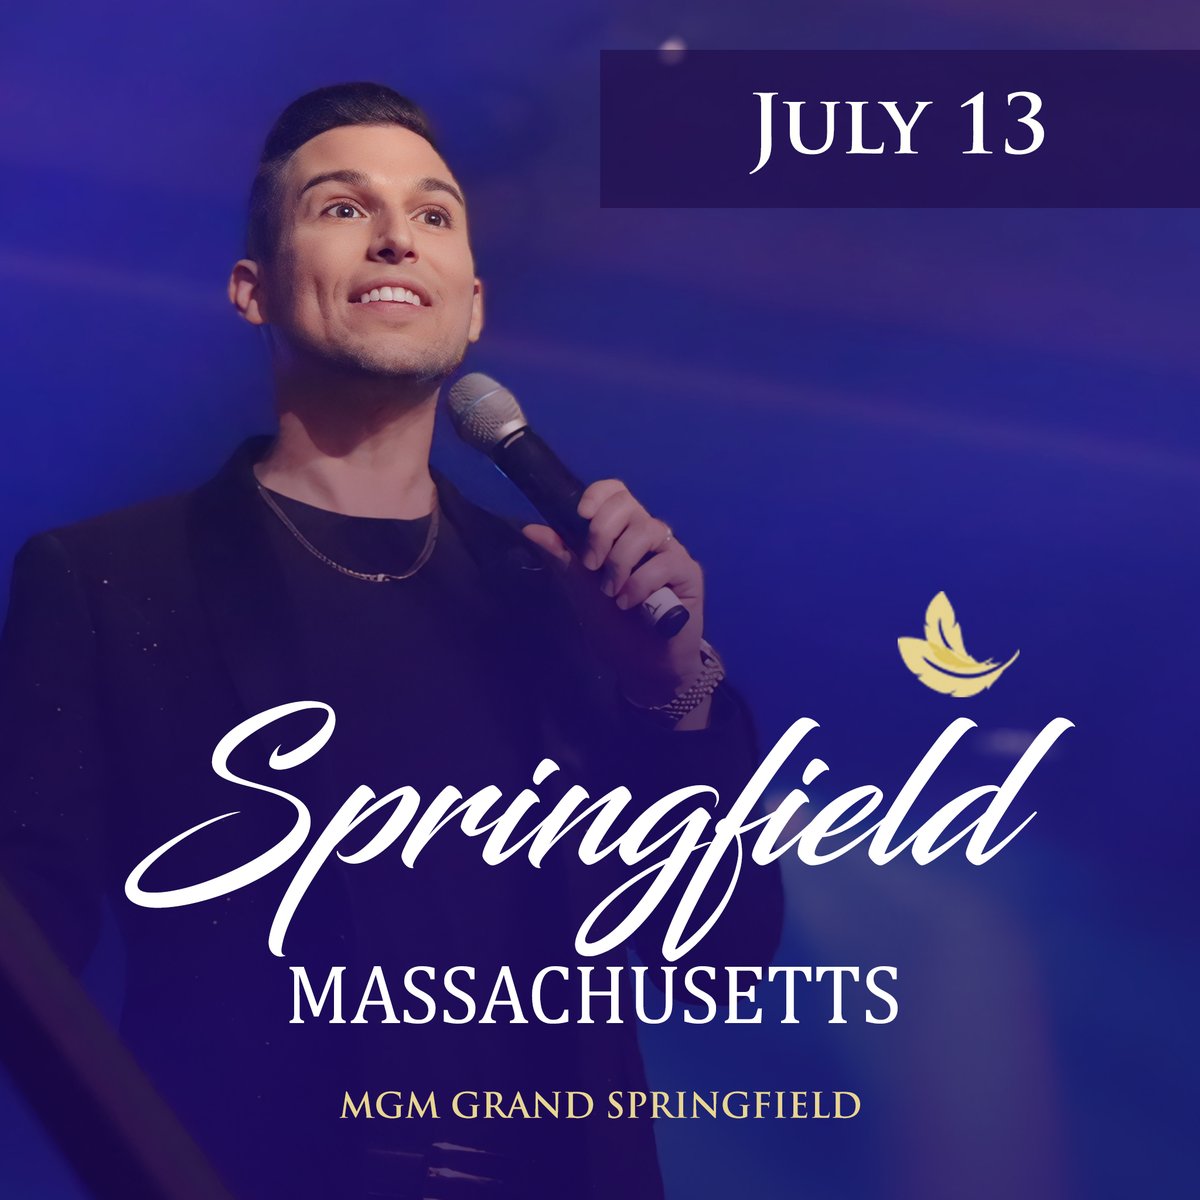 🎉 Springfield, now is your opportunity! Join Psychic Medium Matt Fraser LIVE at MGM Springfield on July 13th for a night filled with messages from spirit. This one-night-only event will inspire and amaze. Tickets are waiting at MeetMattFraser.com